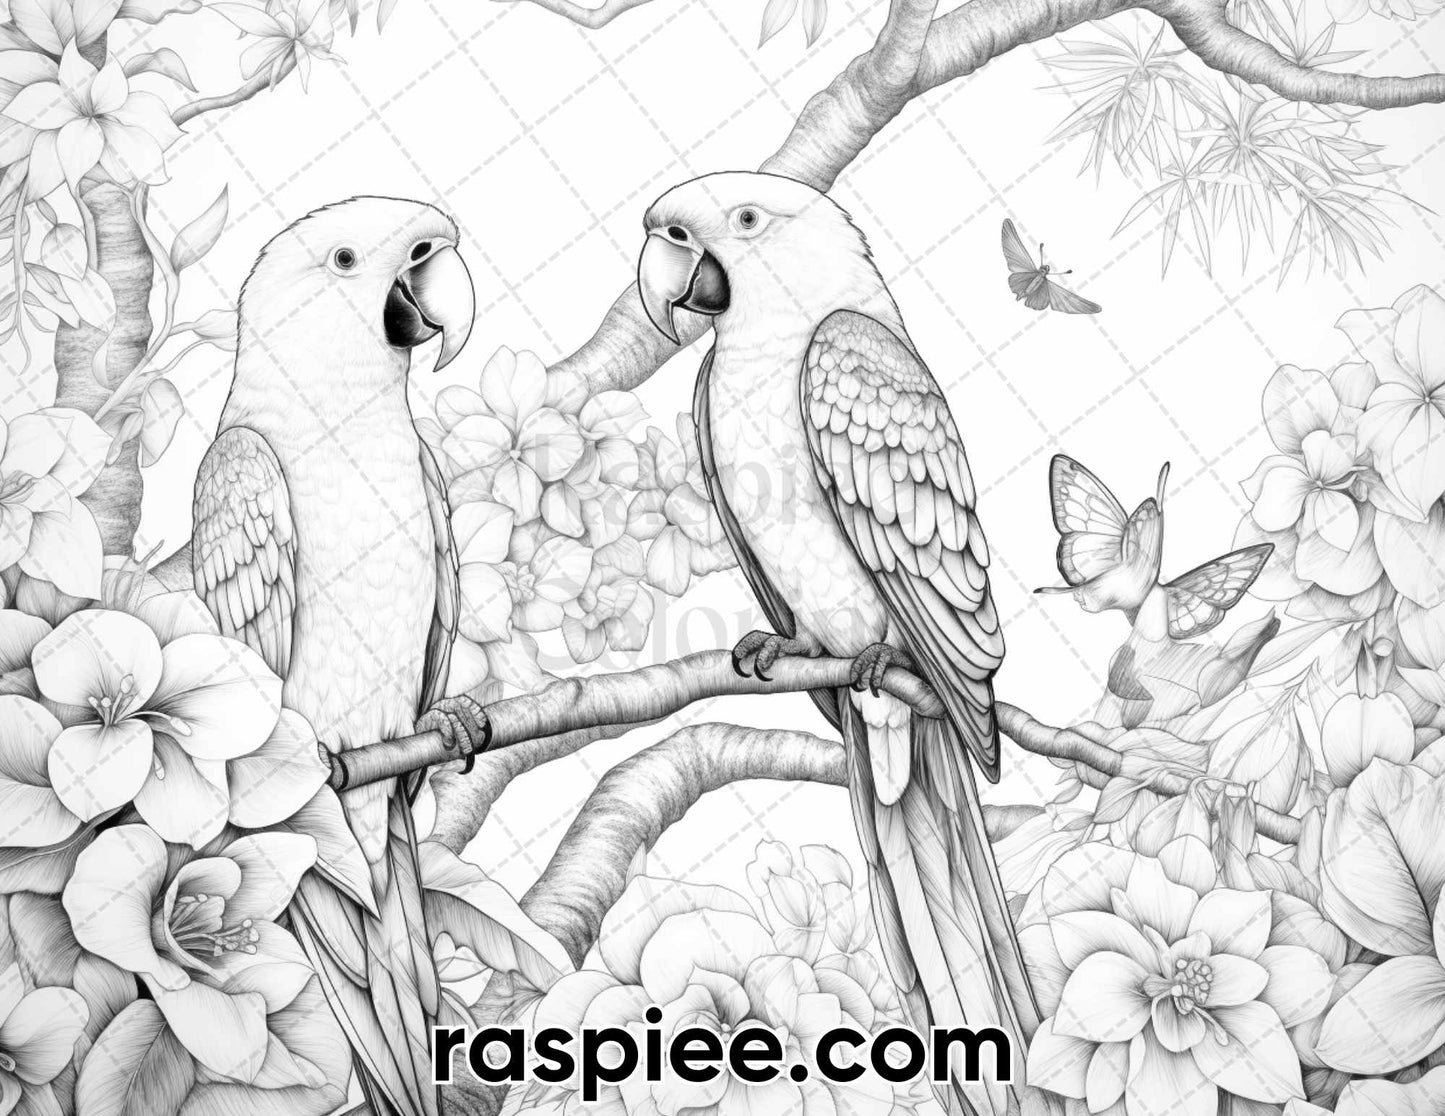 adult coloring pages, adult coloring sheets, adult coloring book pdf, adult coloring book printable, spring coloring pages for adults, spring coloring book pdf, animal coloring pages for adults, animal coloring book pdf, tropical coloring pages, summer coloring pages for adults, tropical coloring book pdf